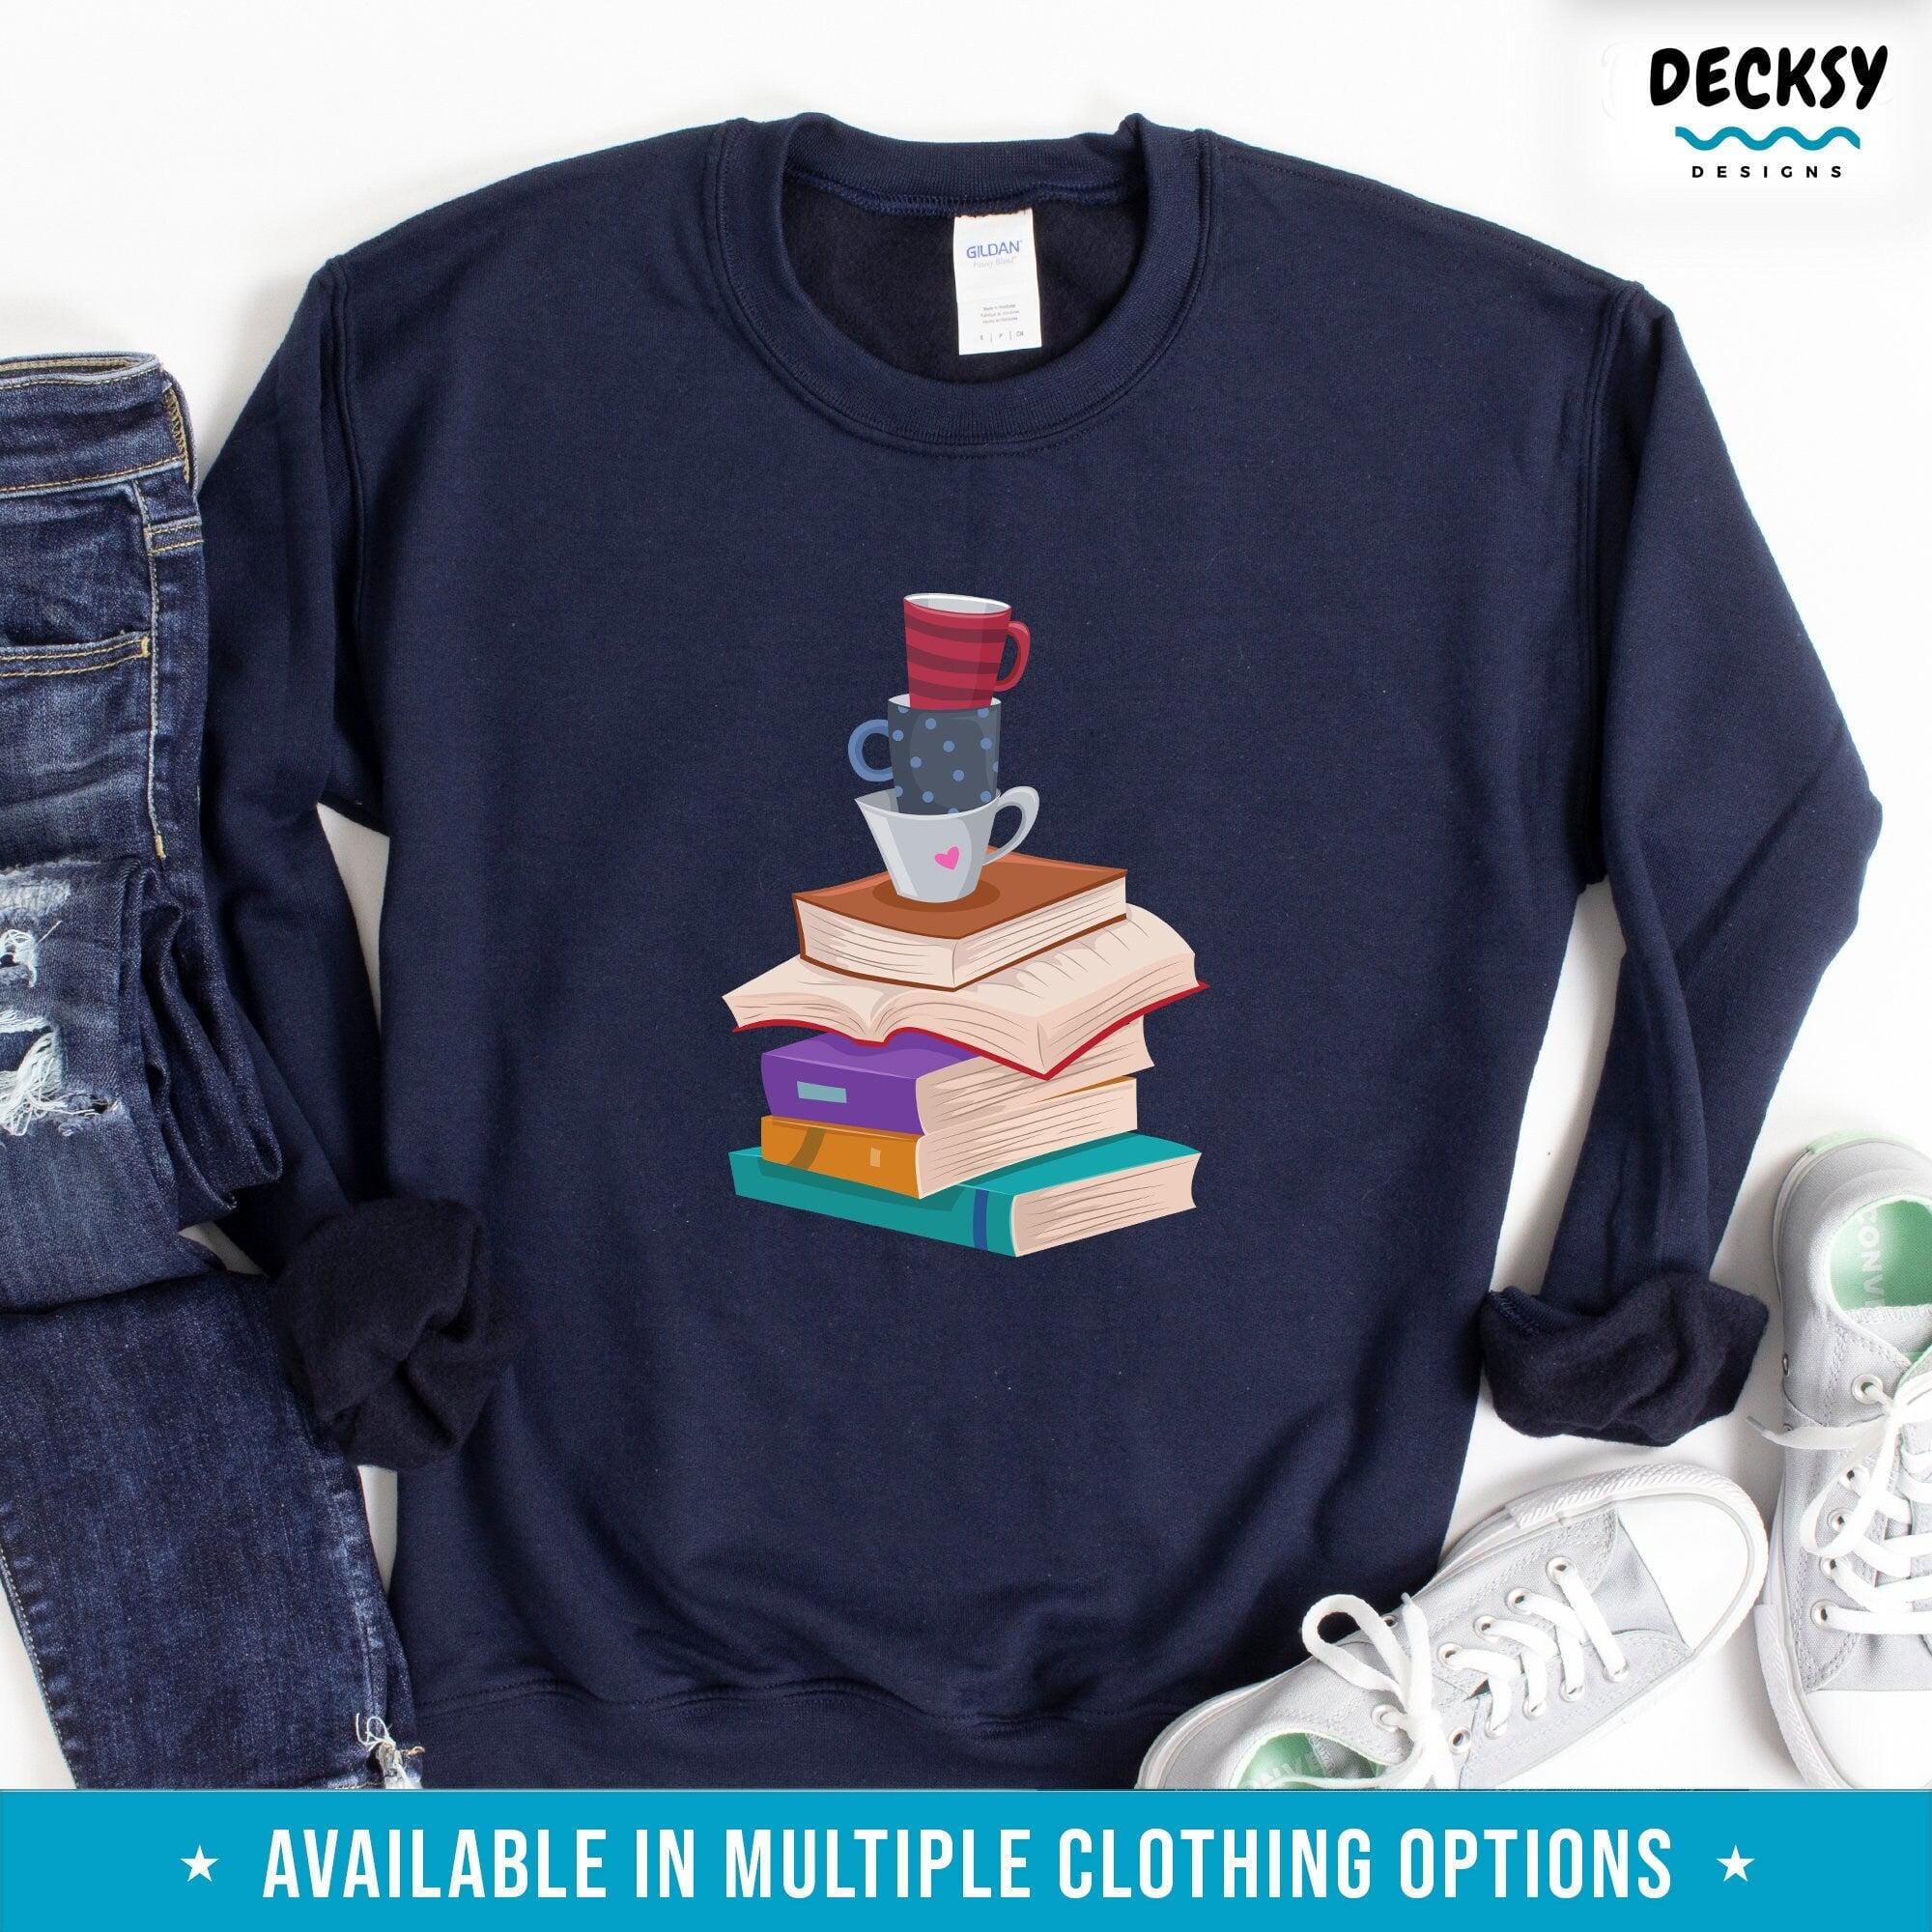 Books And Coffee Shirt, Gift For Reader-Clothing:Gender-Neutral Adult Clothing:Tops & Tees:T-shirts:Graphic Tees-DecksyDesigns